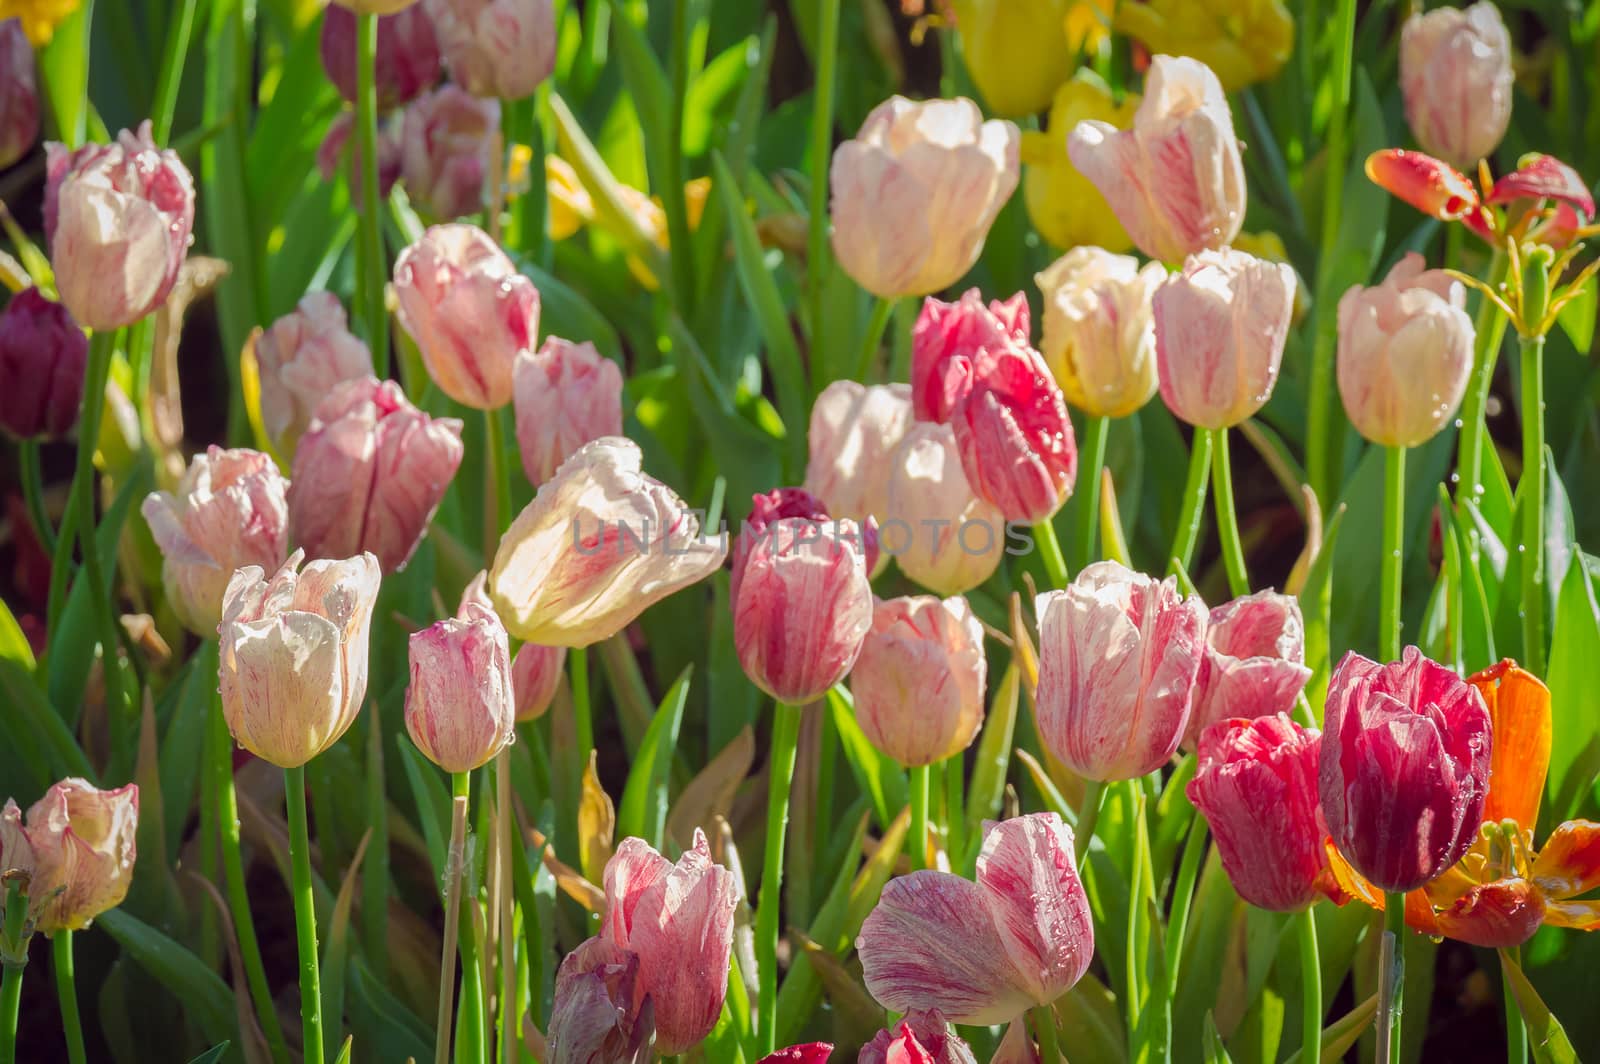 Field of Tulips in various colors